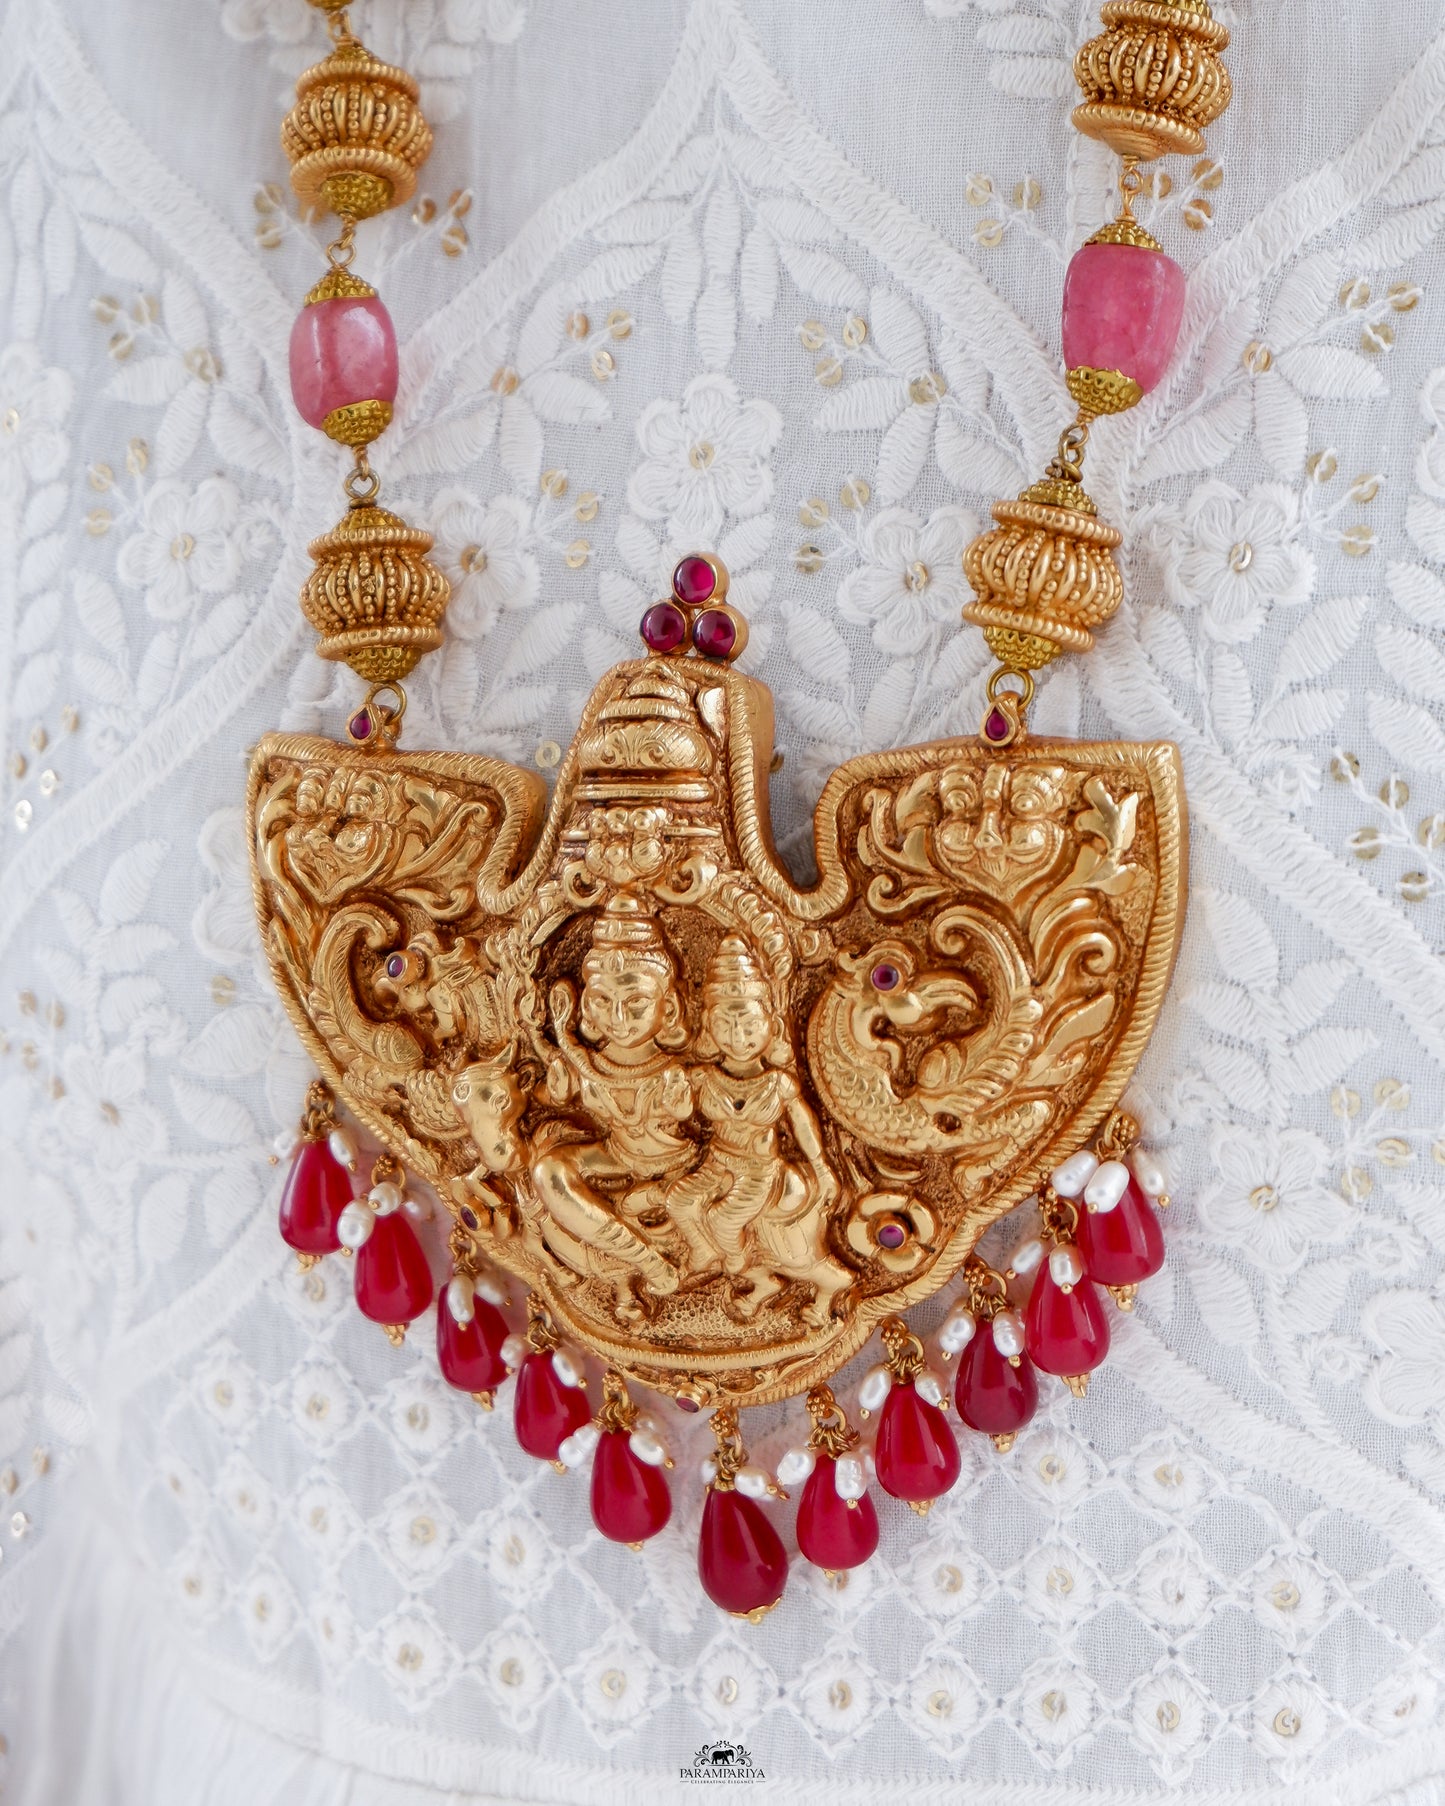 Intricately-crafted temple antique necklace featuring a depiction of Shiv and Paravathi on pure silver with antique gold micron plating, a perfect unisex necklace.